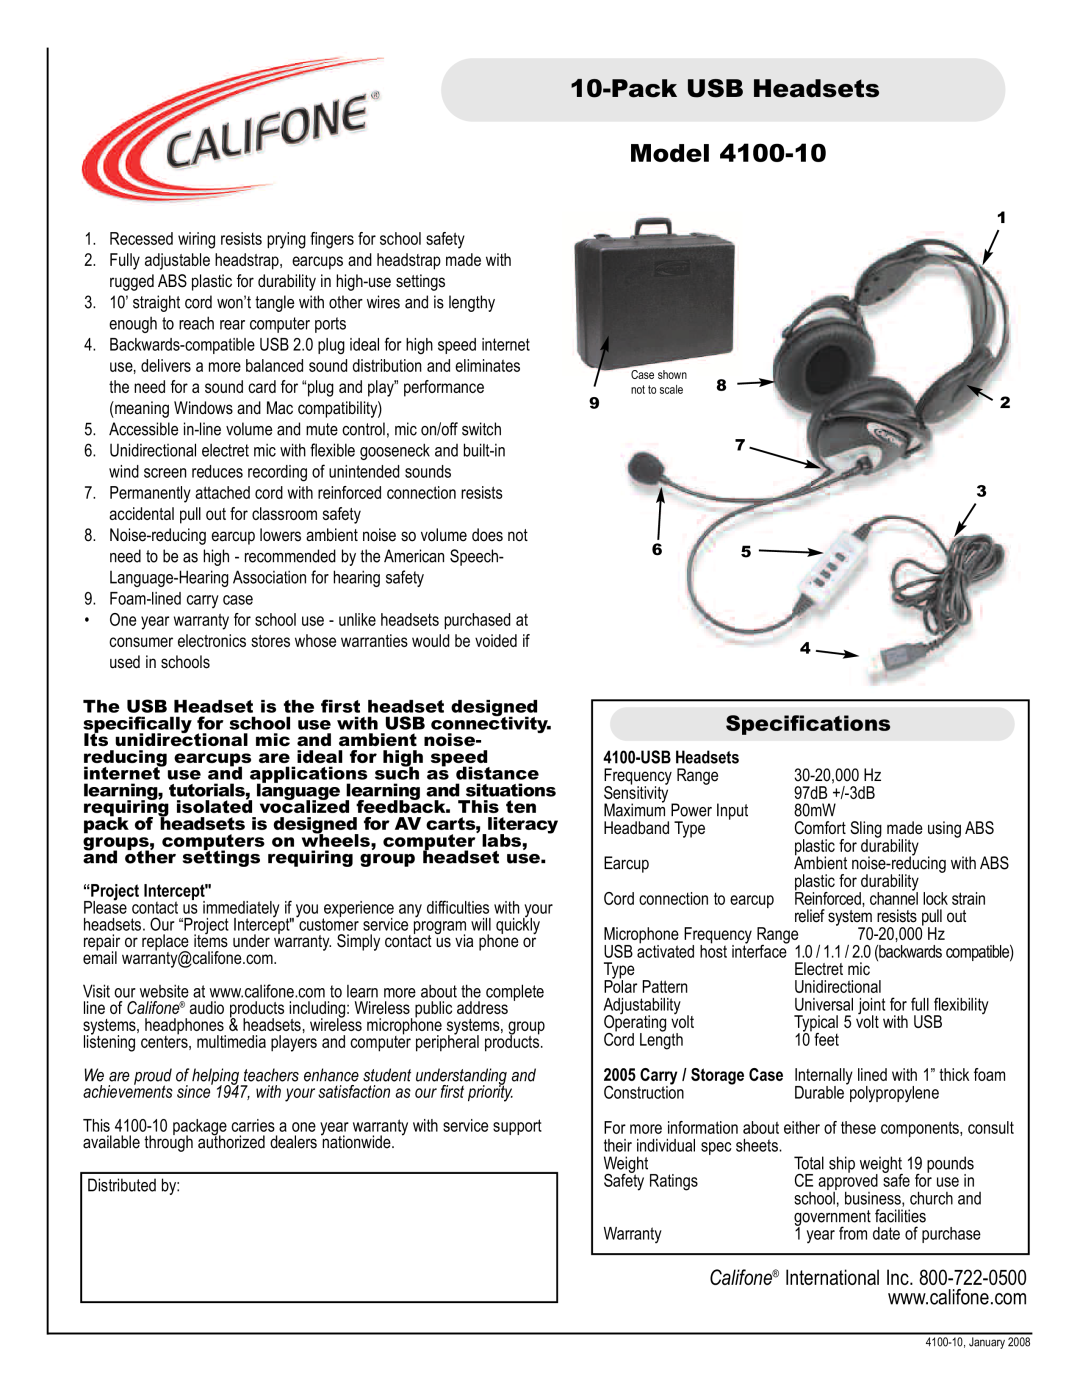 Califone 4100-10 specifications PackUSB Headsets Model, Specifications, Califone International Inc, USBHeadsets 